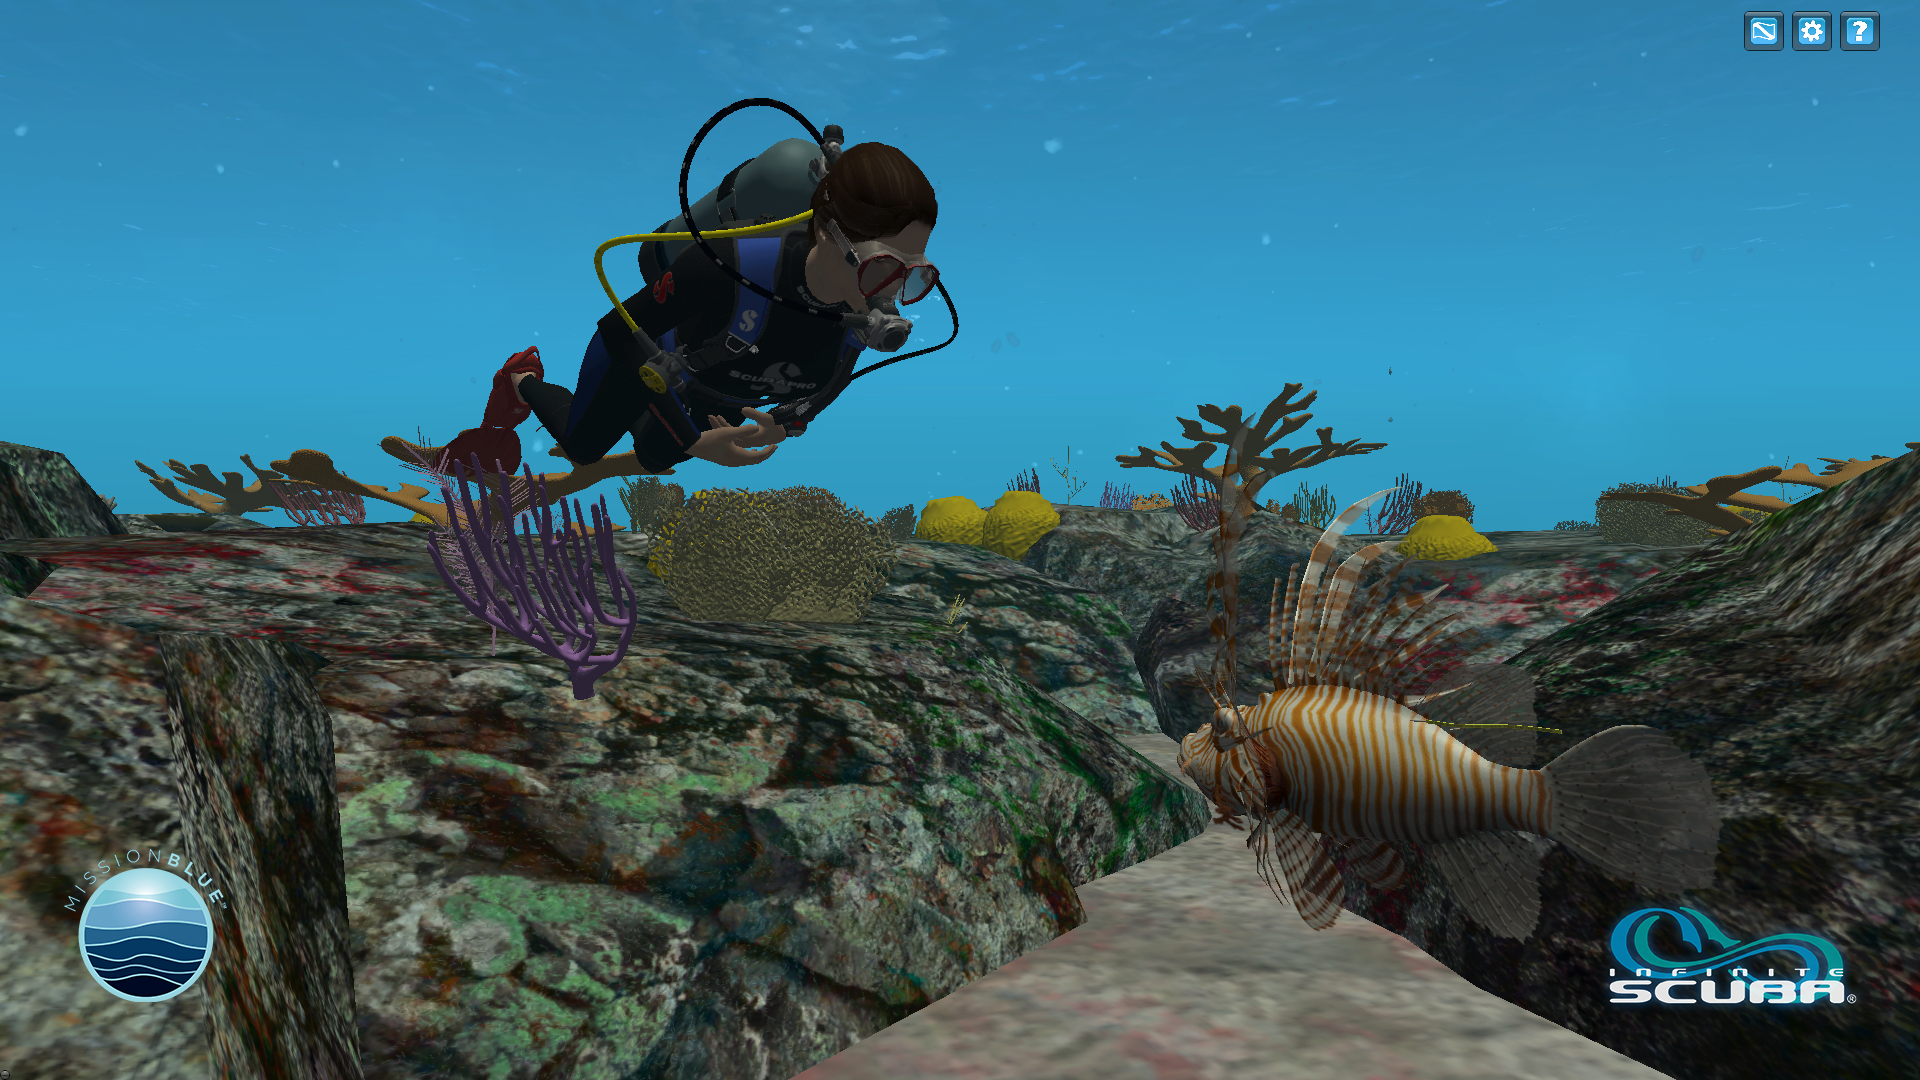 Dr. Sylvia Earle checks out an invasive lionfish in Infinite Scuba